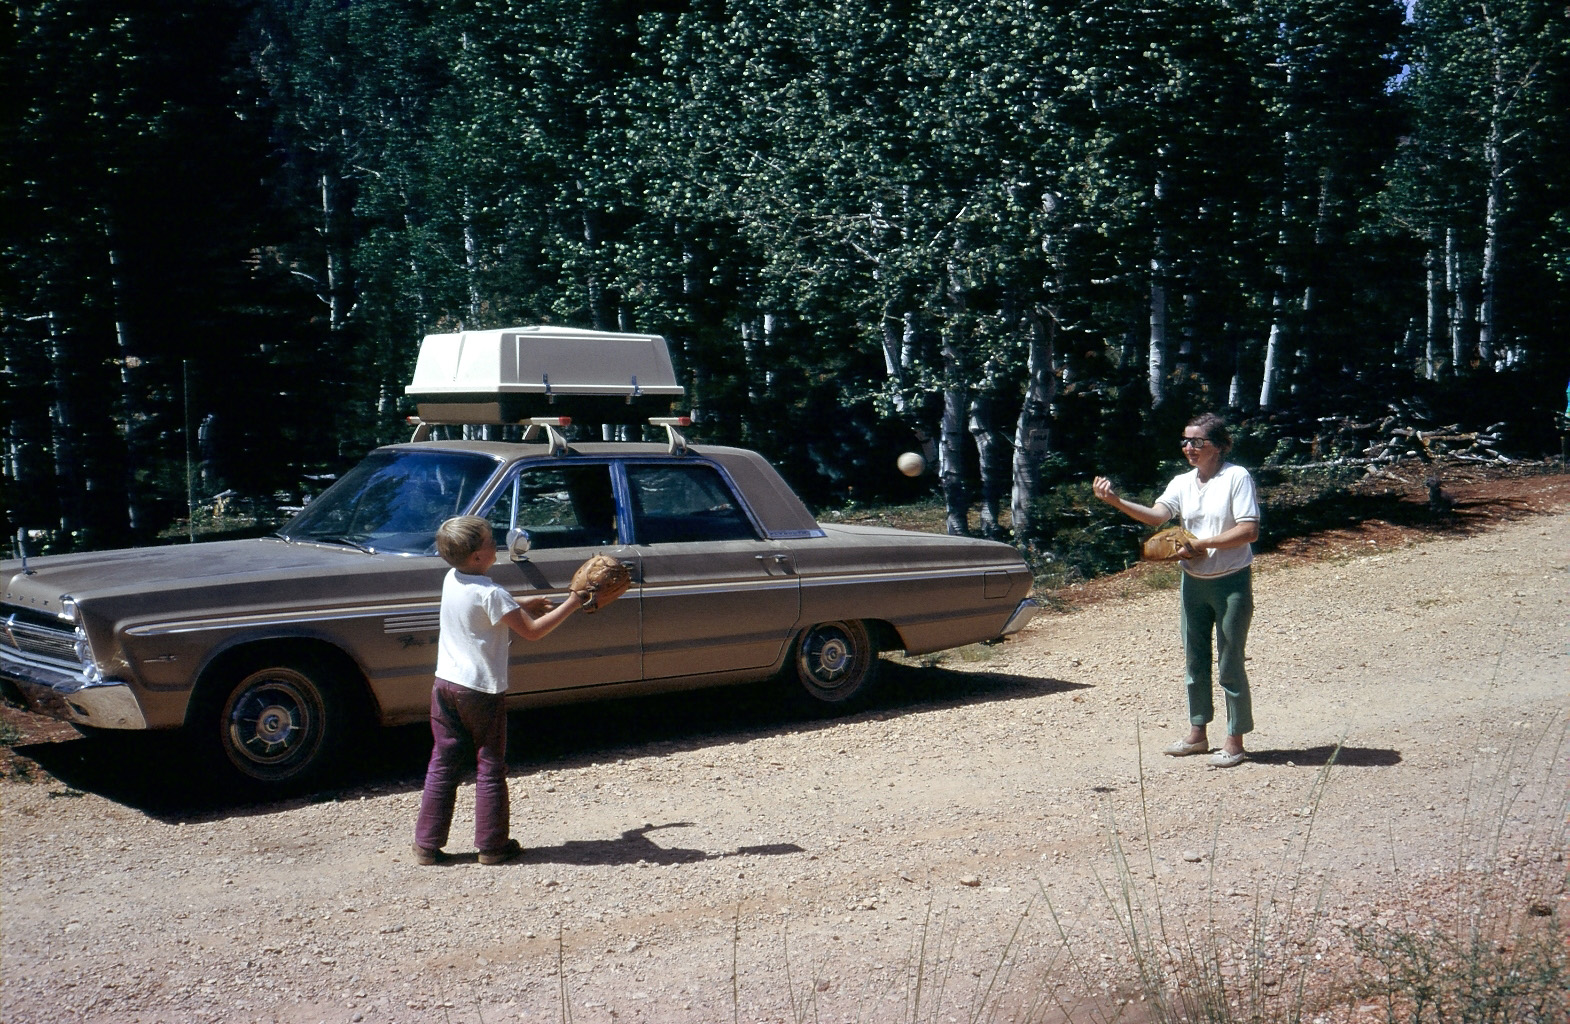 My parents bought property in Southern Utah about 1970 with the intention to build a cabin for our family.They did,and it took over a decade to finish. But the work was worth it.

It was eventually sold in the early 90s to help with their retirement.

Here are my little brother and our Mom playing catch on the dirt road near where our cabin would be.

The car is our 1965 Plymouth Fury III with a massive 383 cubic inch  gas guzzling V-8, a car which would haul the trailer we stayed in up there. I drove that car as a senior in high school;it was a thrill to drive up to my friends homes with that burbling exhaust promising teenage adventure.